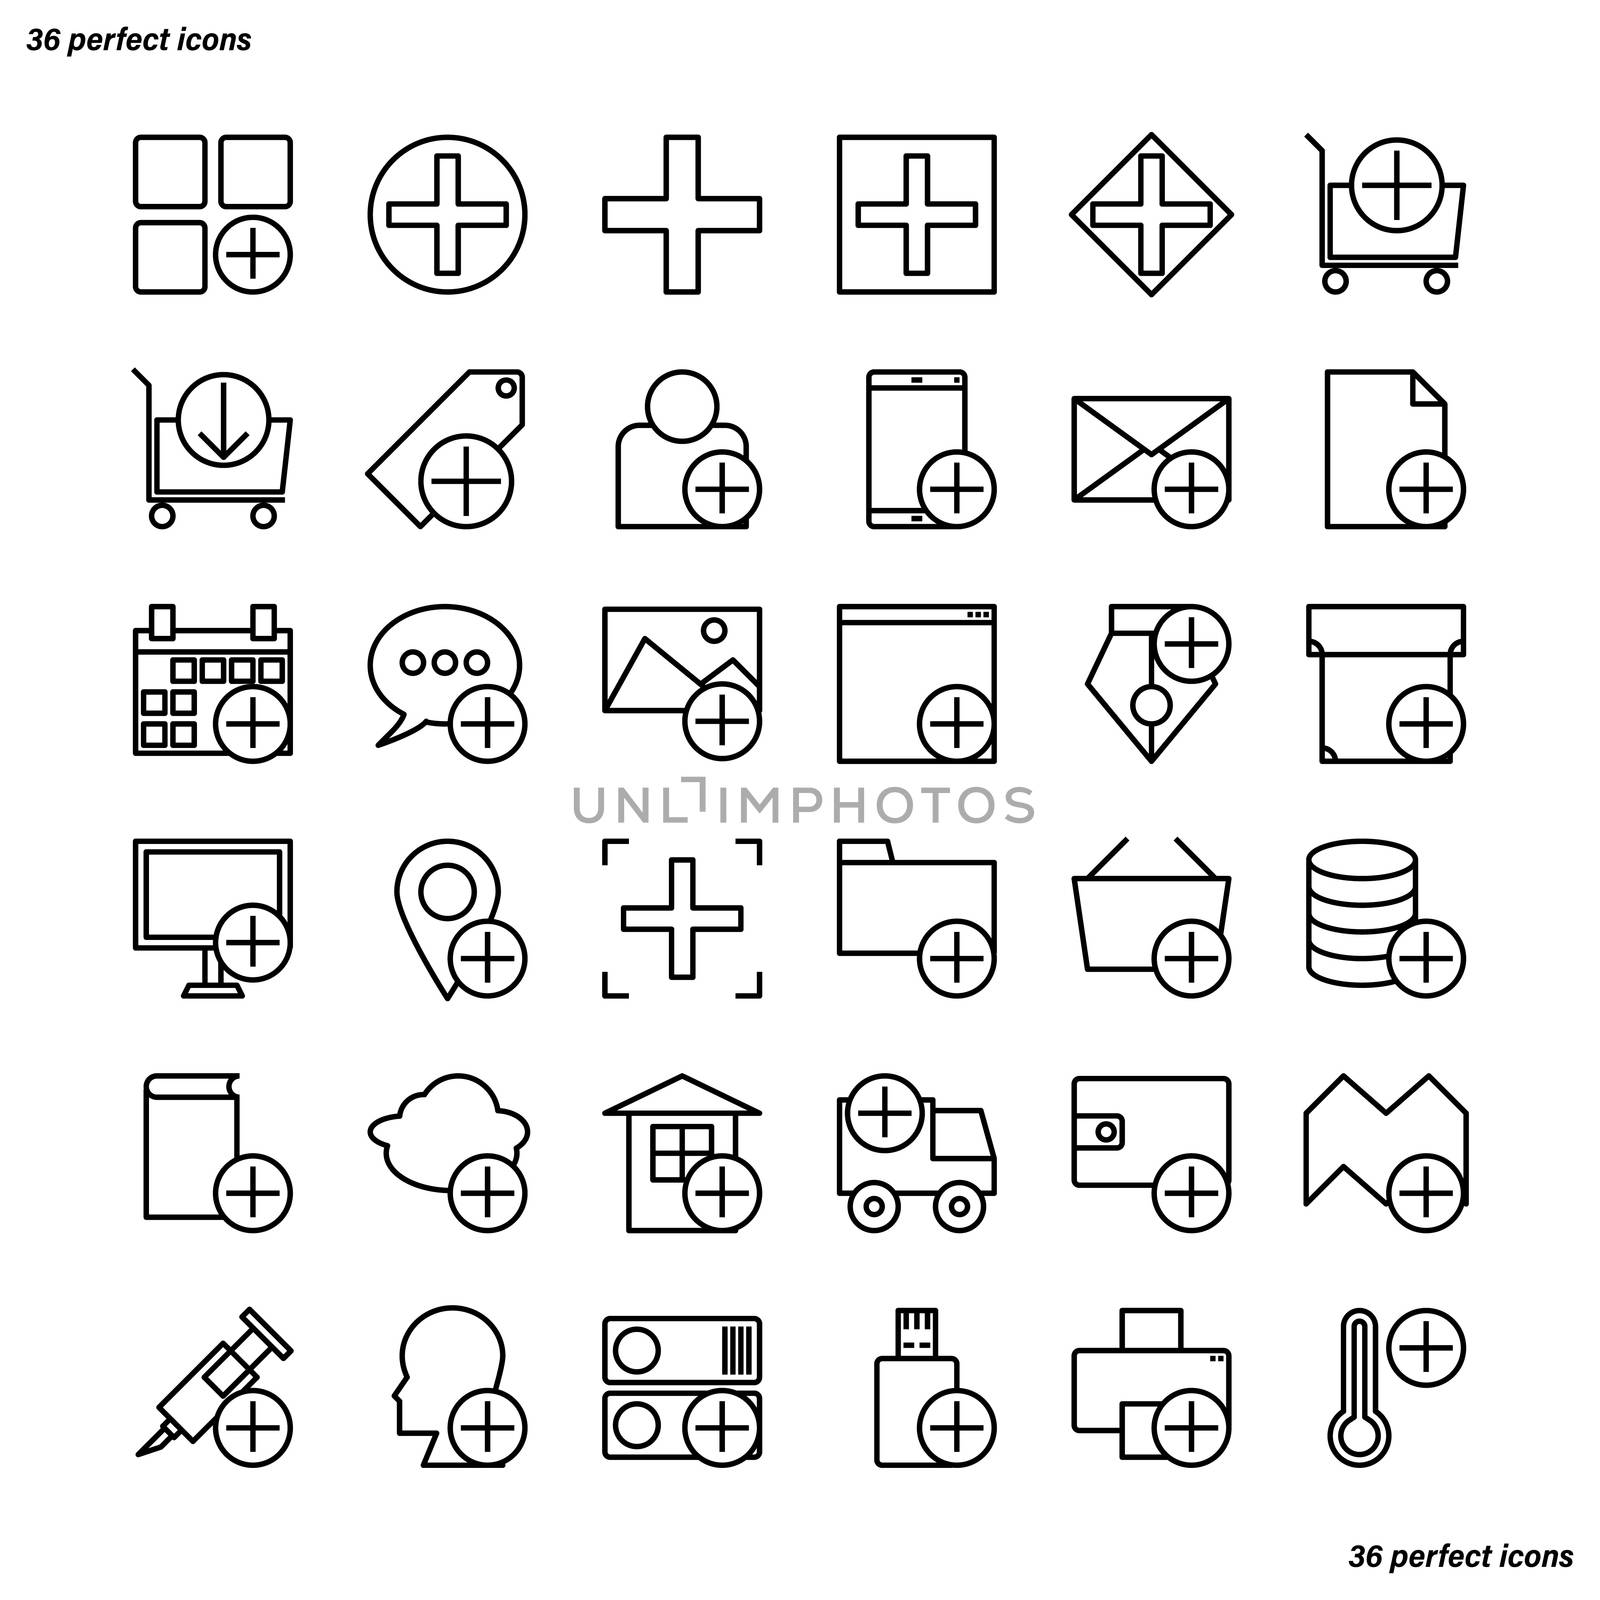 Add Outline Icons perfect pixel. by phatpc